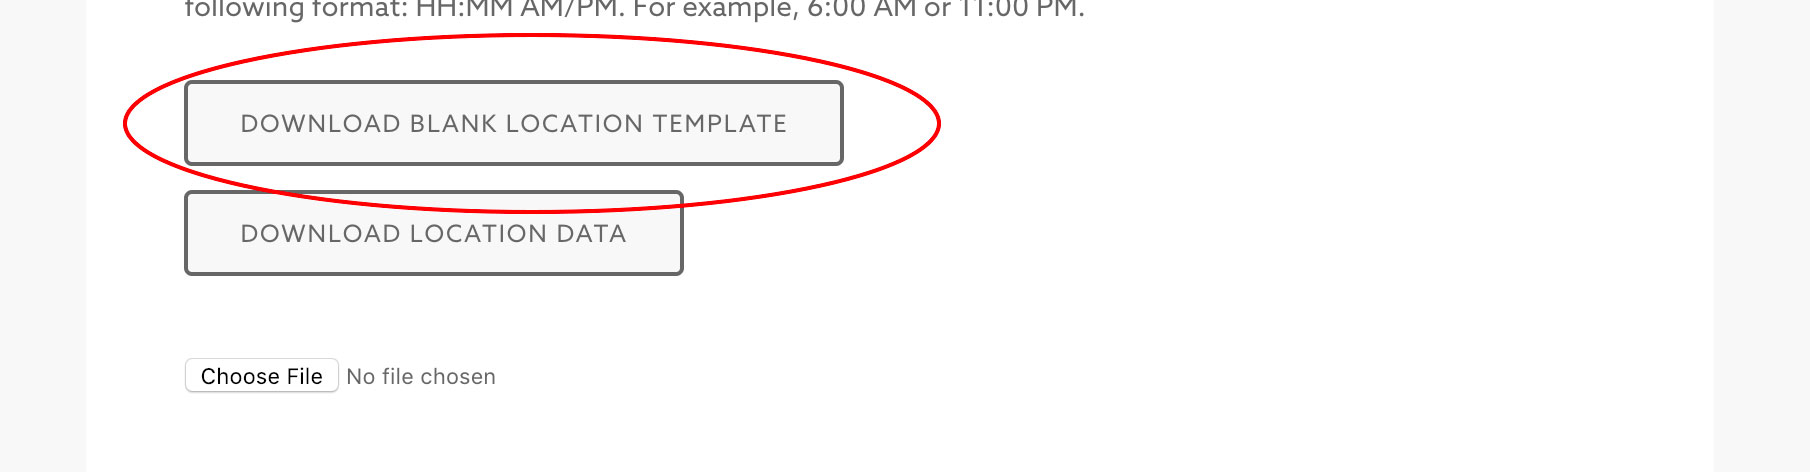 Blank location template download button